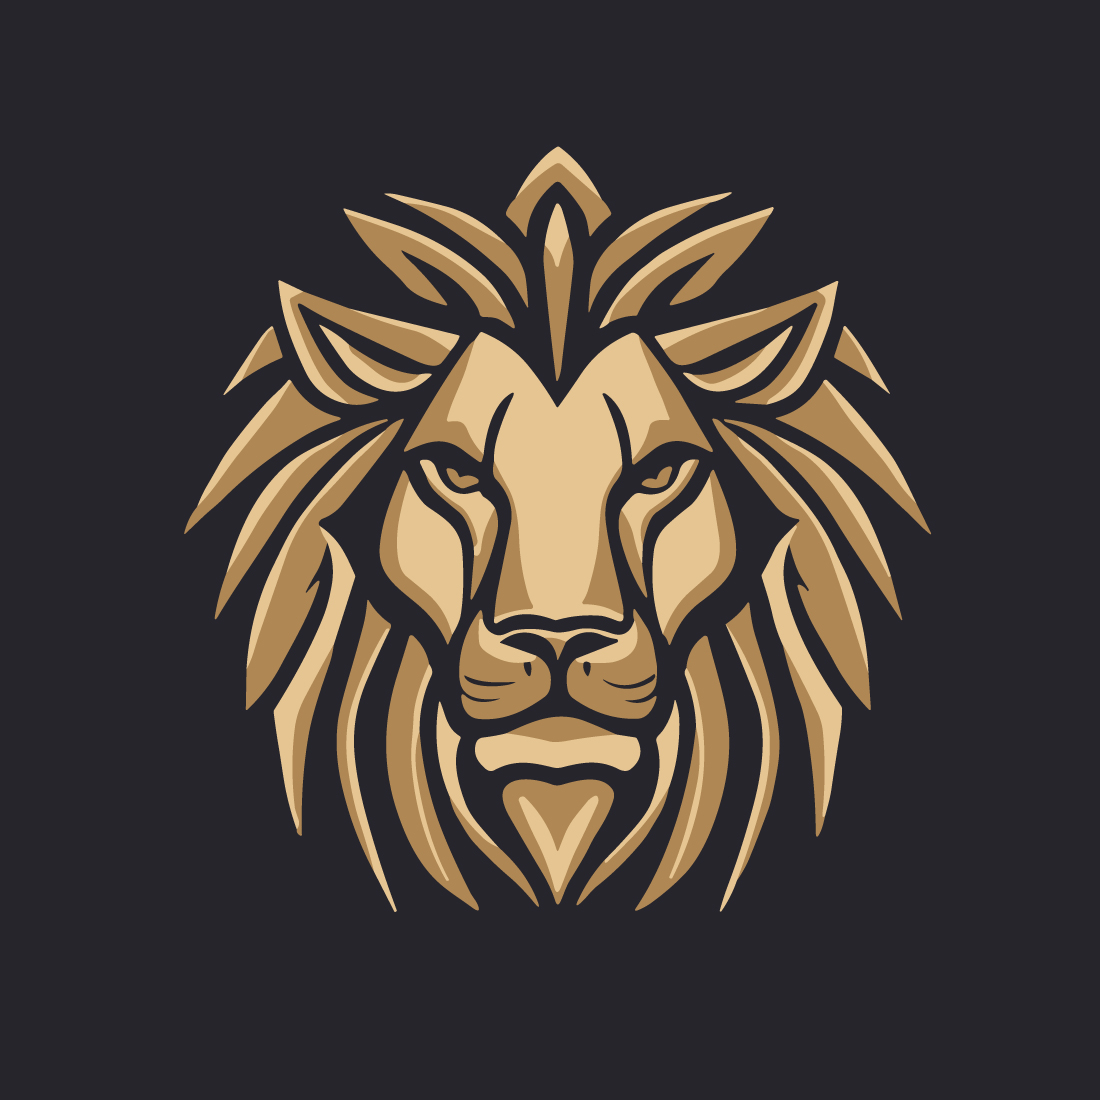 High Resolution Best Quality Lion Logo only in 20$ preview image.